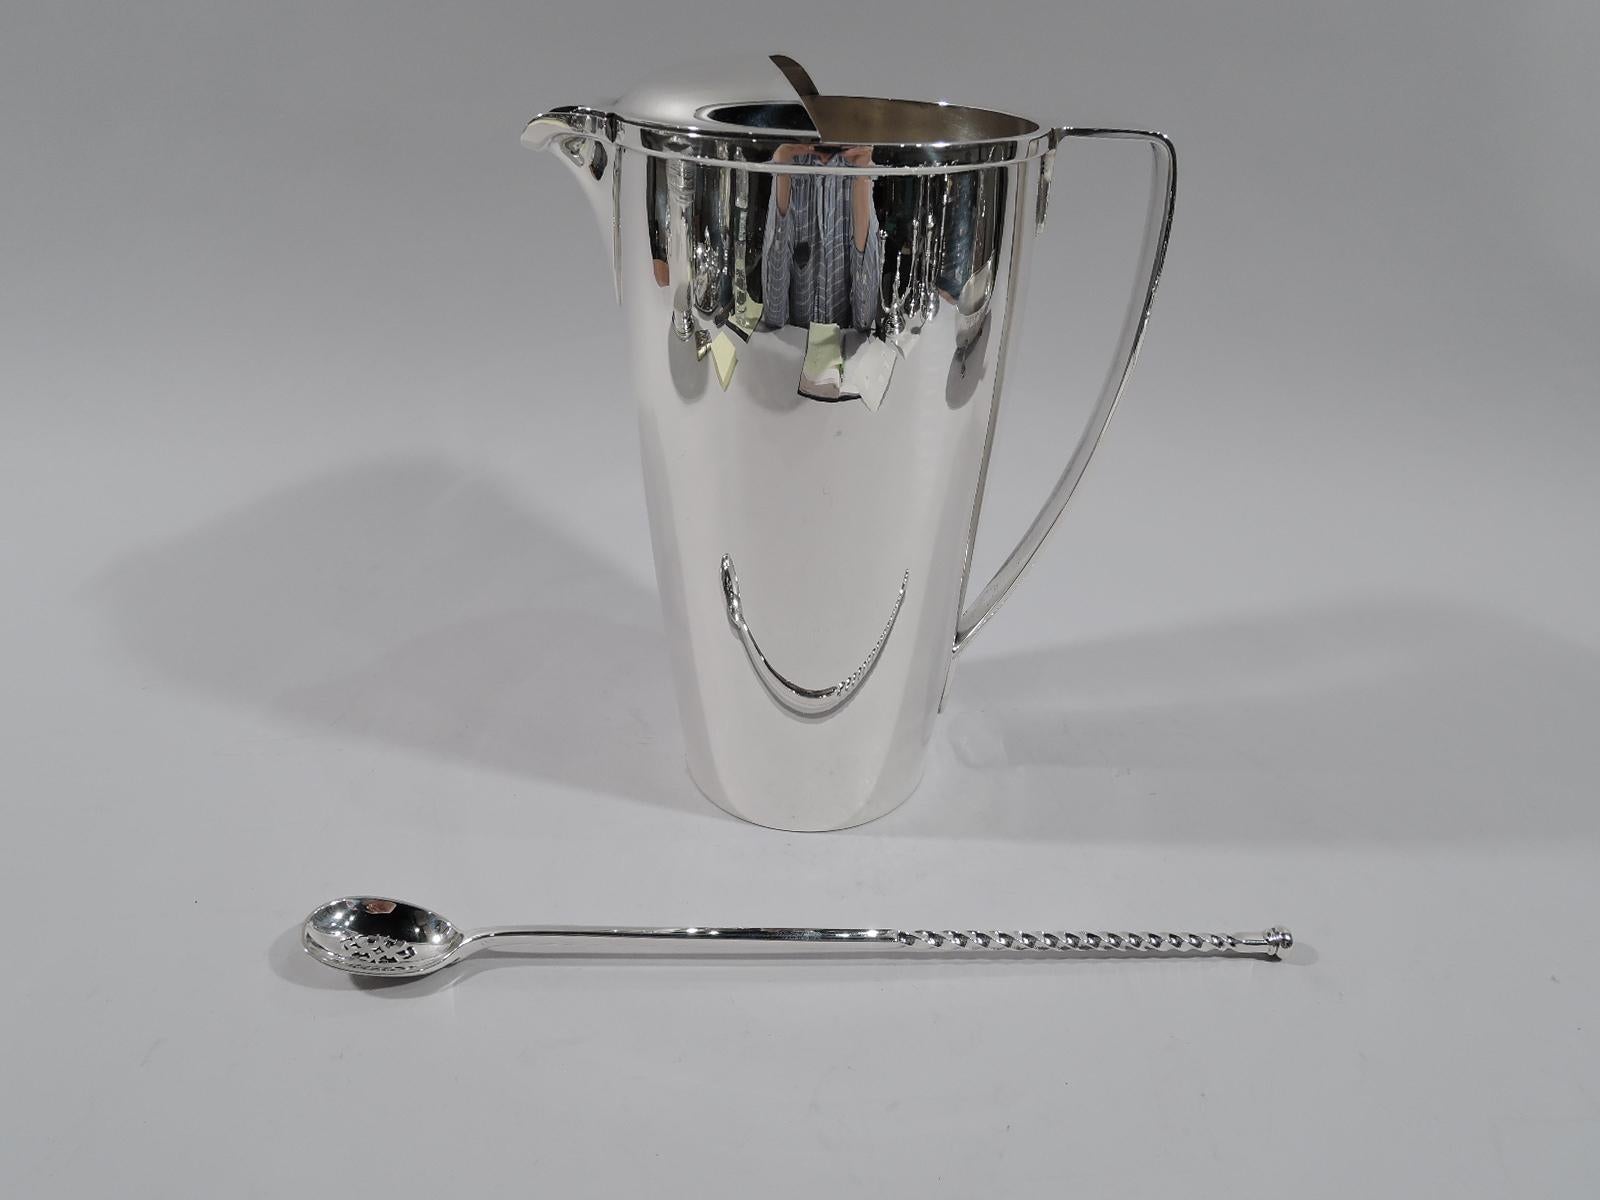 American modern sterling silver bar pitcher. Made by Tiffany & Co. in New York, circa 1933. Tapering sides, scroll bracket handle. Spout U-form with built in strainer and raised ice guard. Super stylish with nice heft. Fully marked including pattern